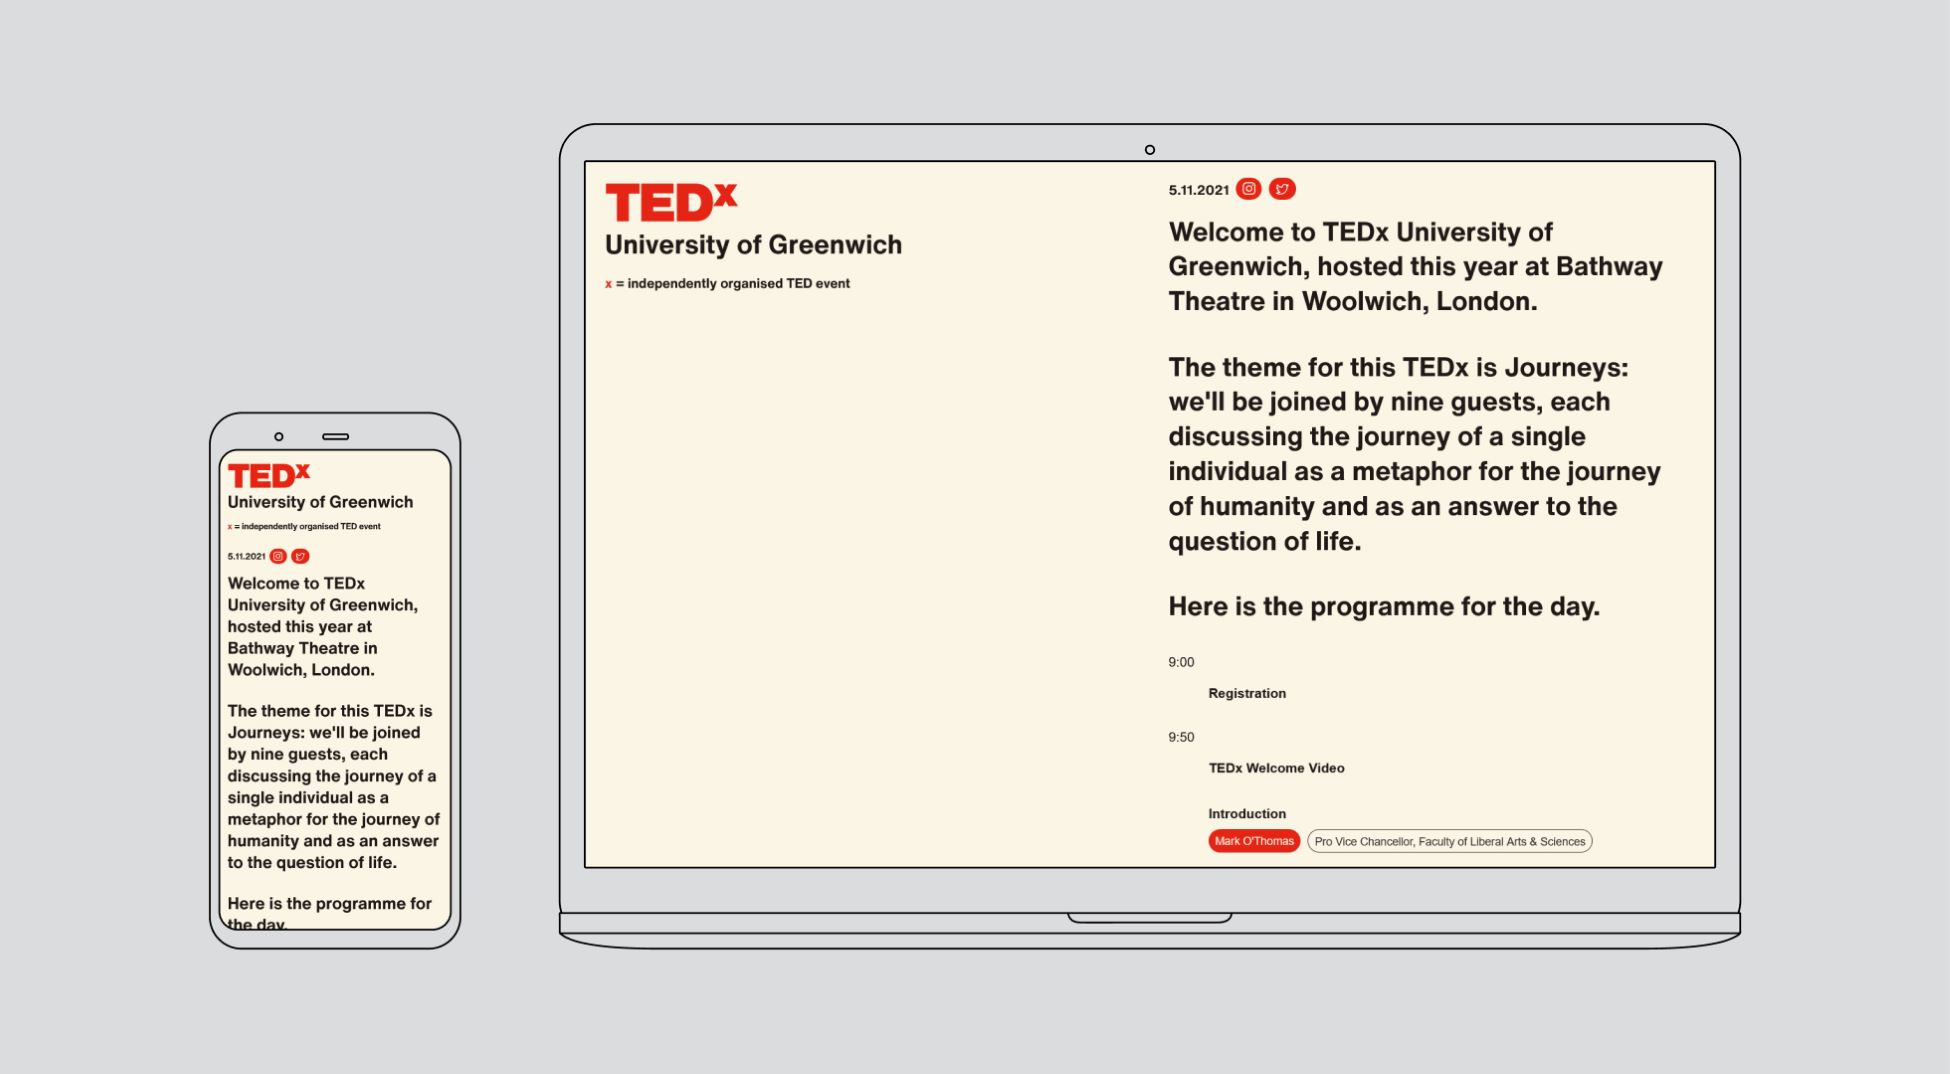 Mockup of a phone and a laptop with the TEDx 2021 programme website in their viewports